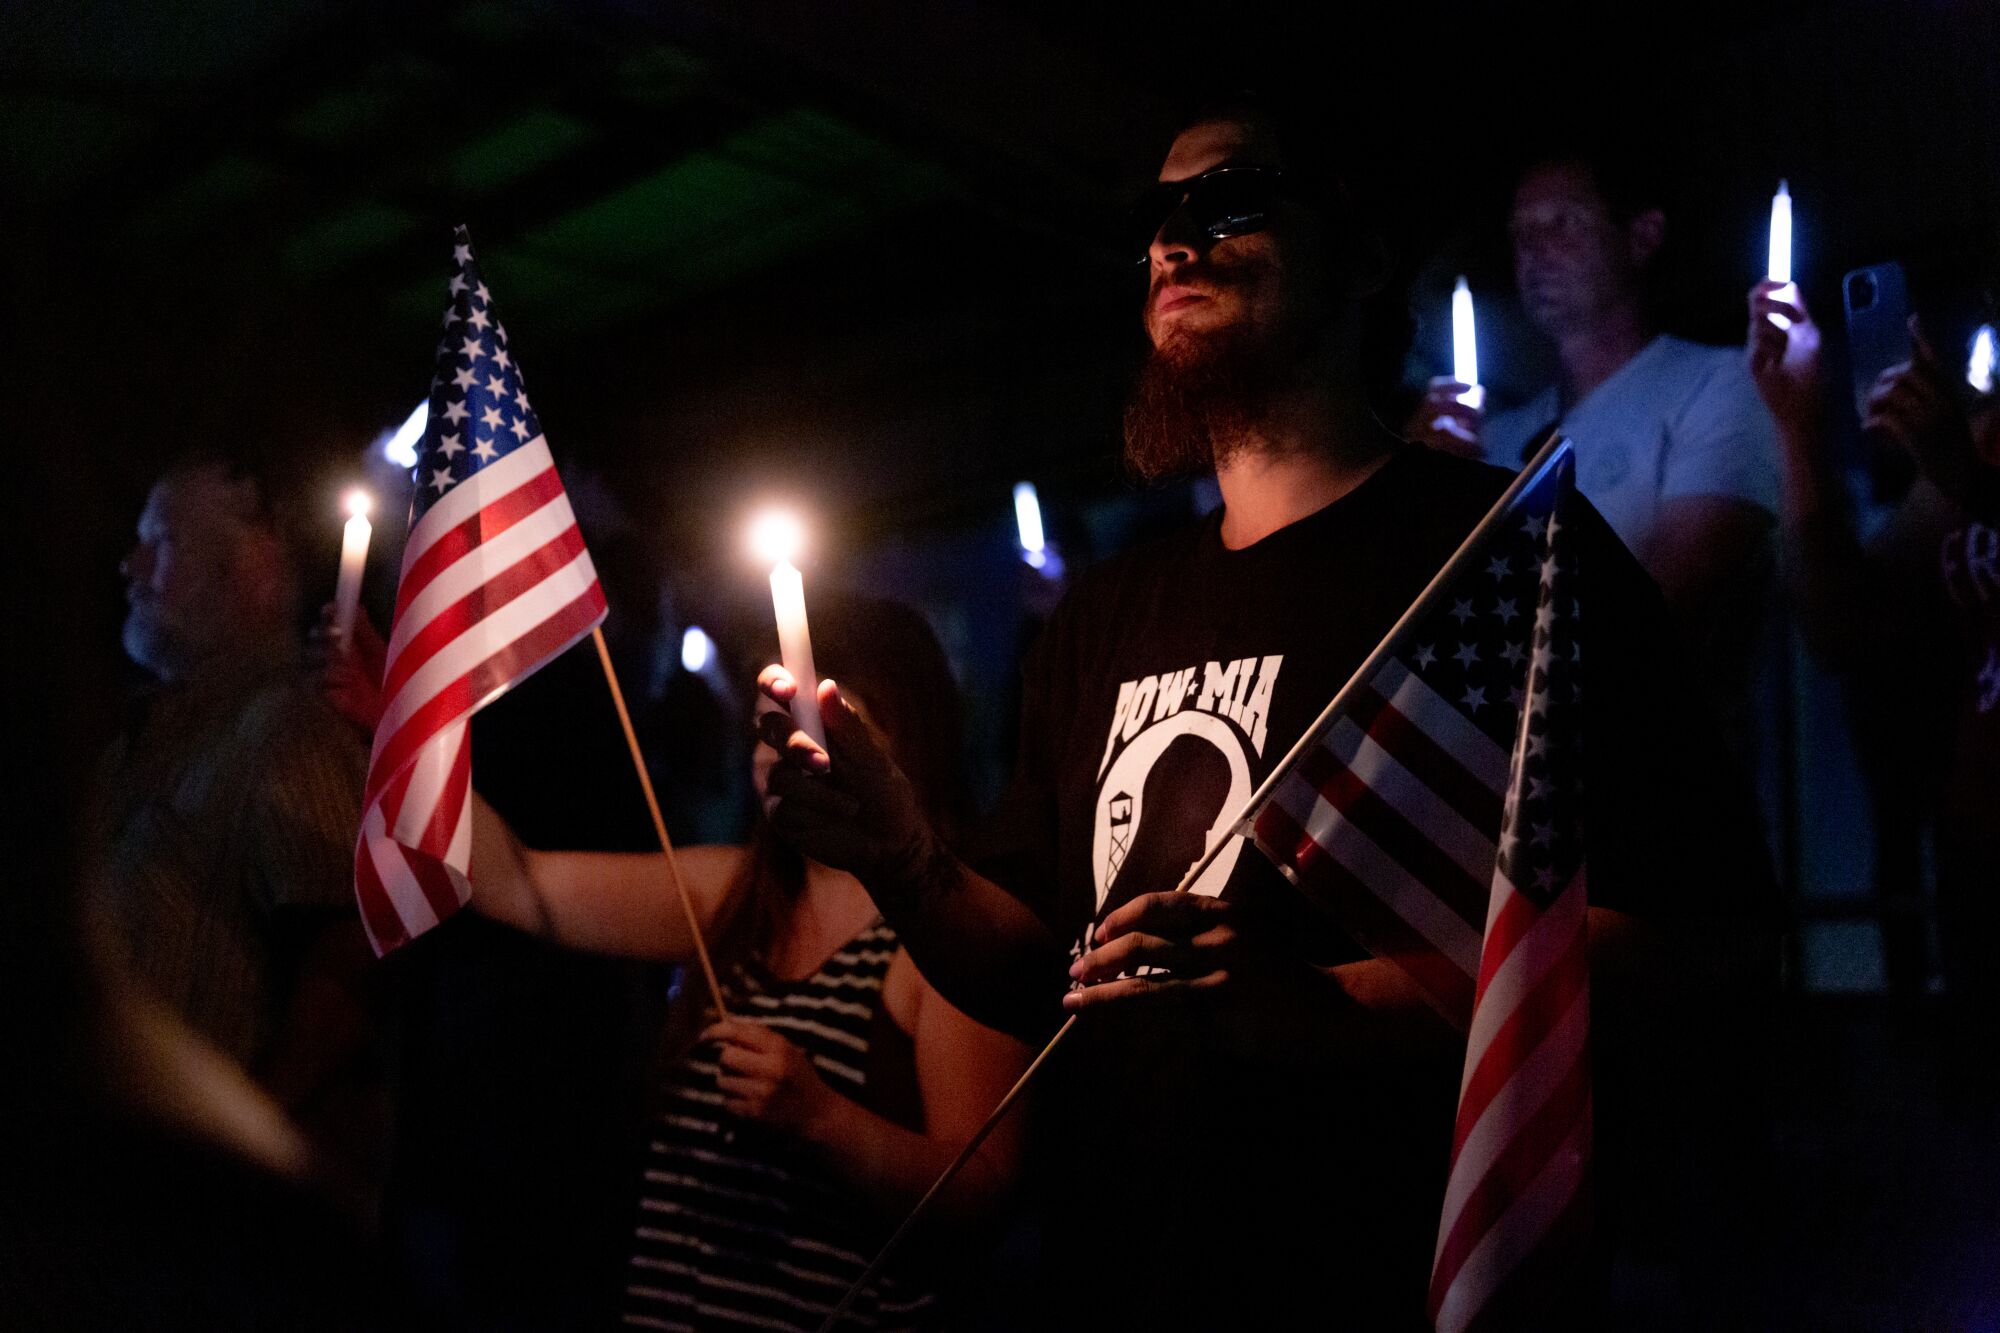 A man in a POW-MIA T-shirt holds a flag and a candle in the dark among other people.